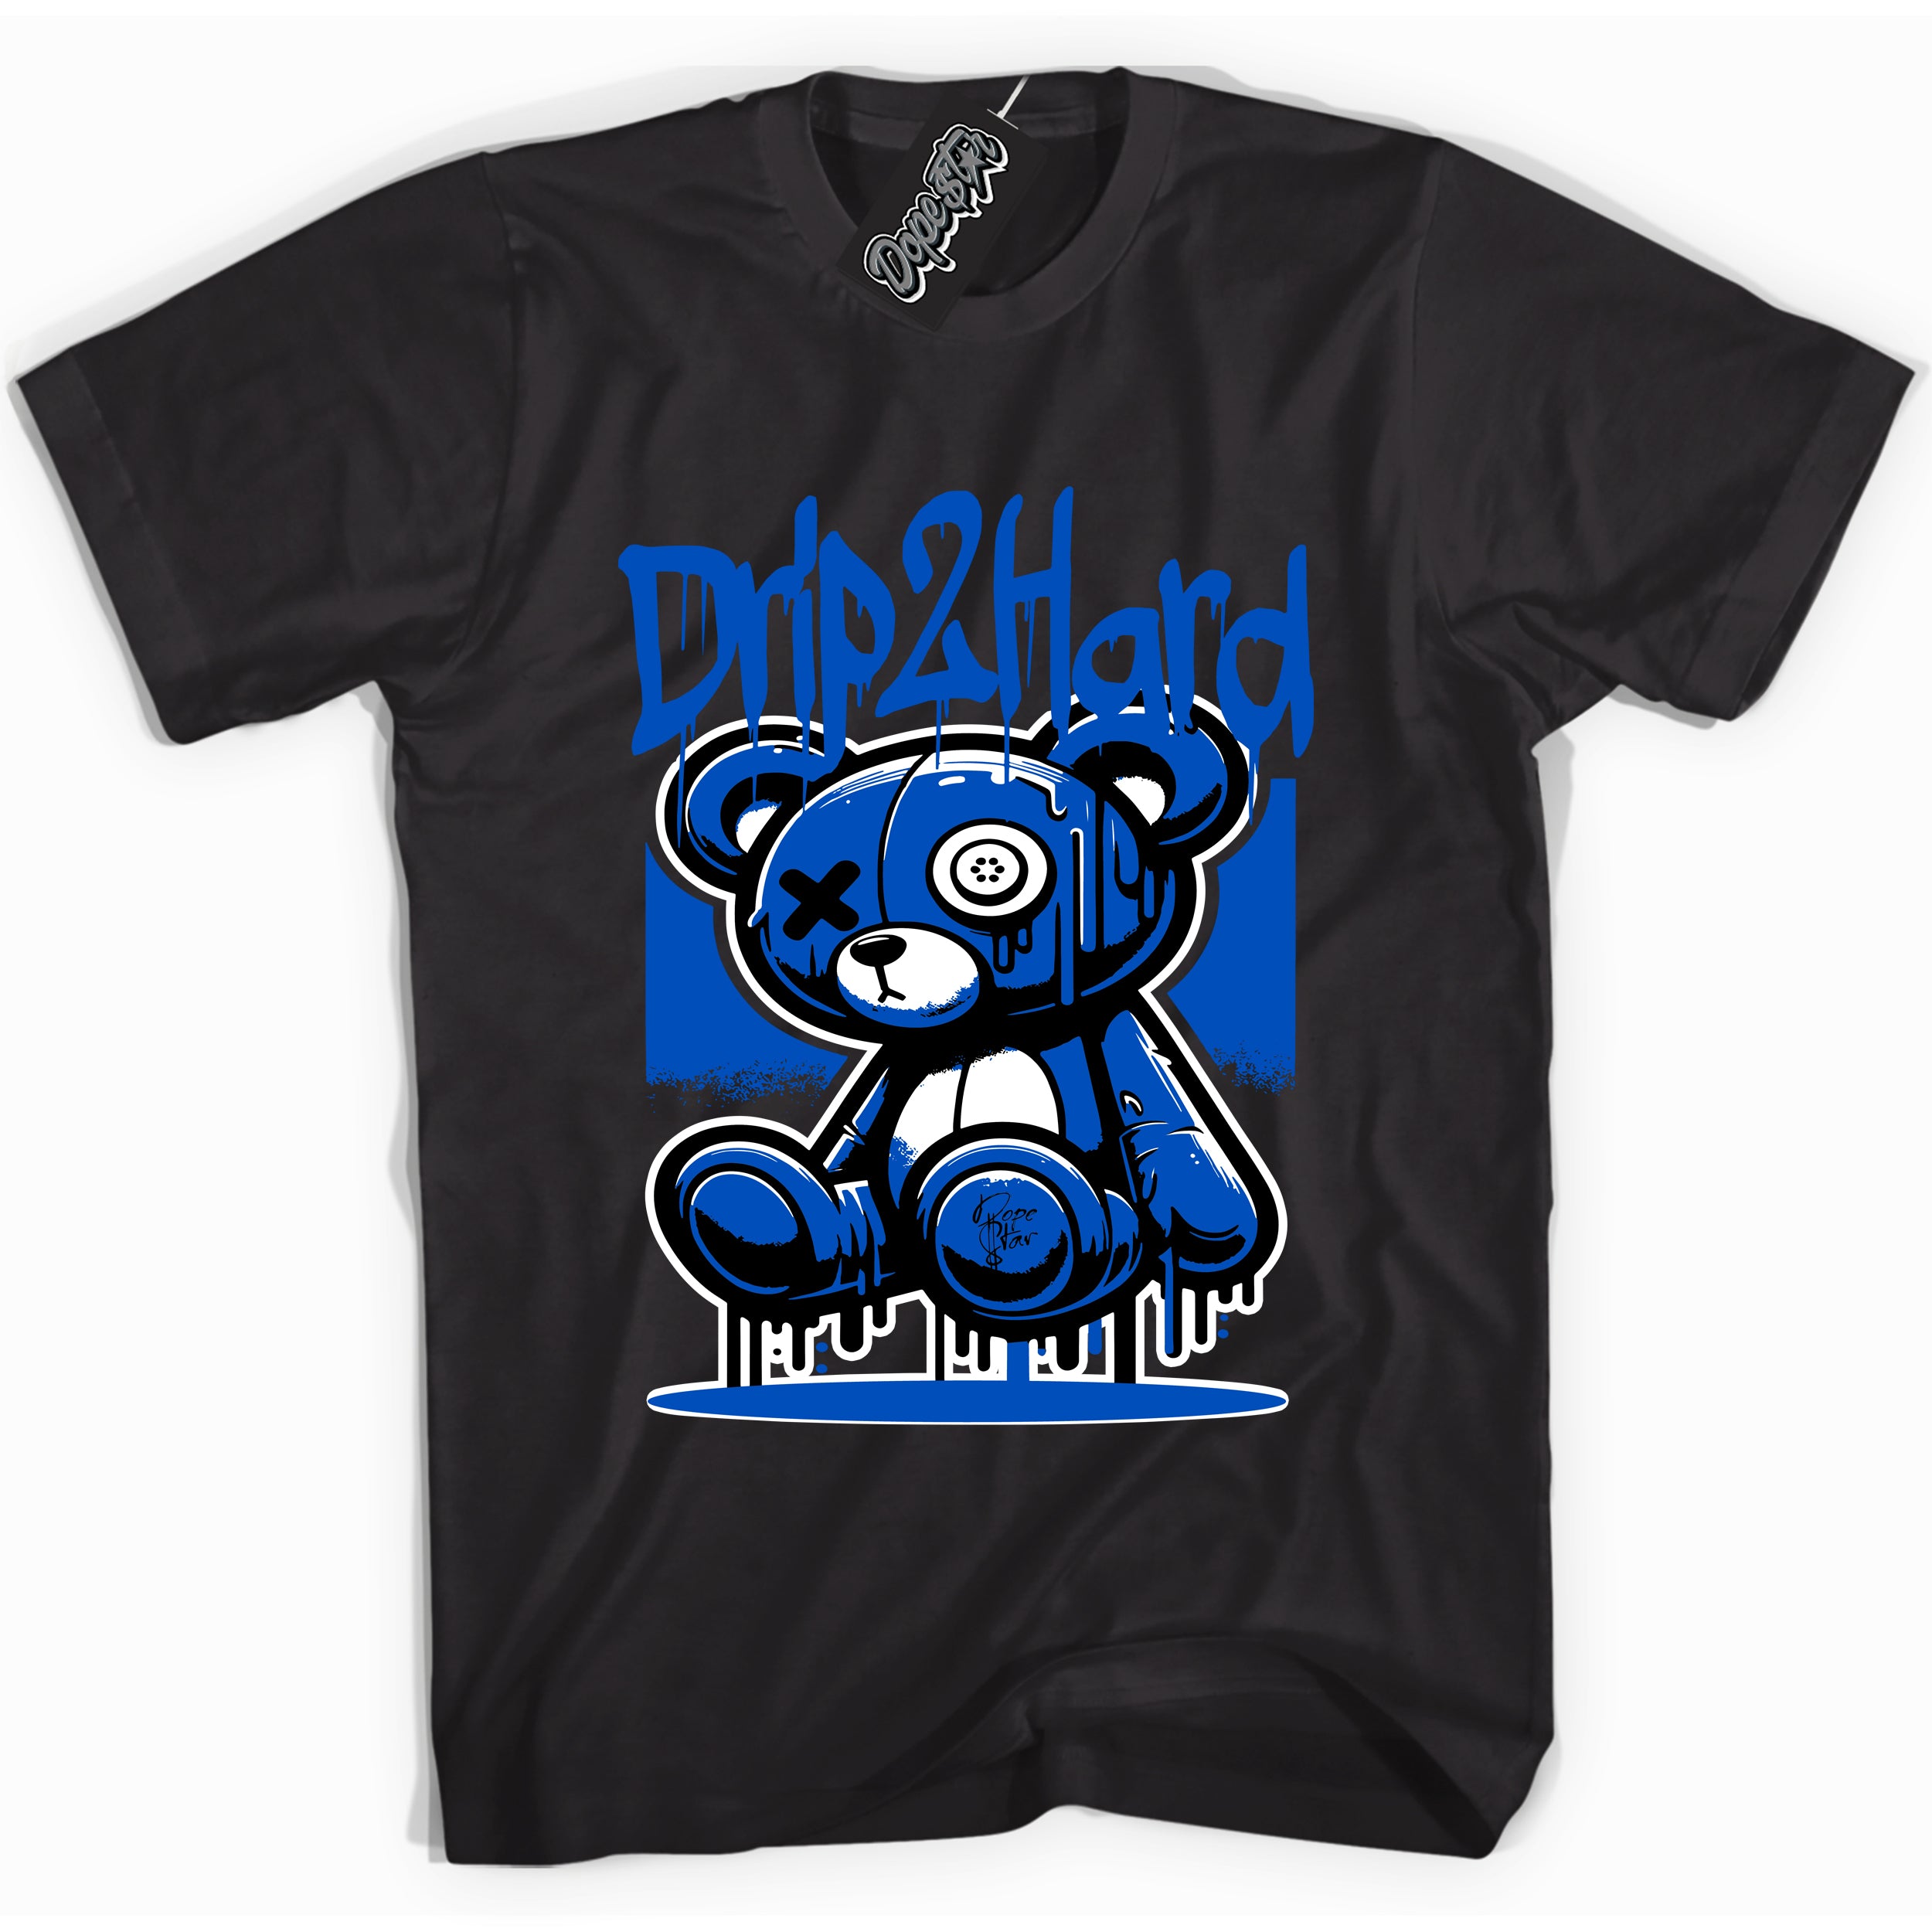 Cool Black graphic tee with "Drip 2 Hard" design, that perfectly matches Royal Reimagined 1s sneakers 